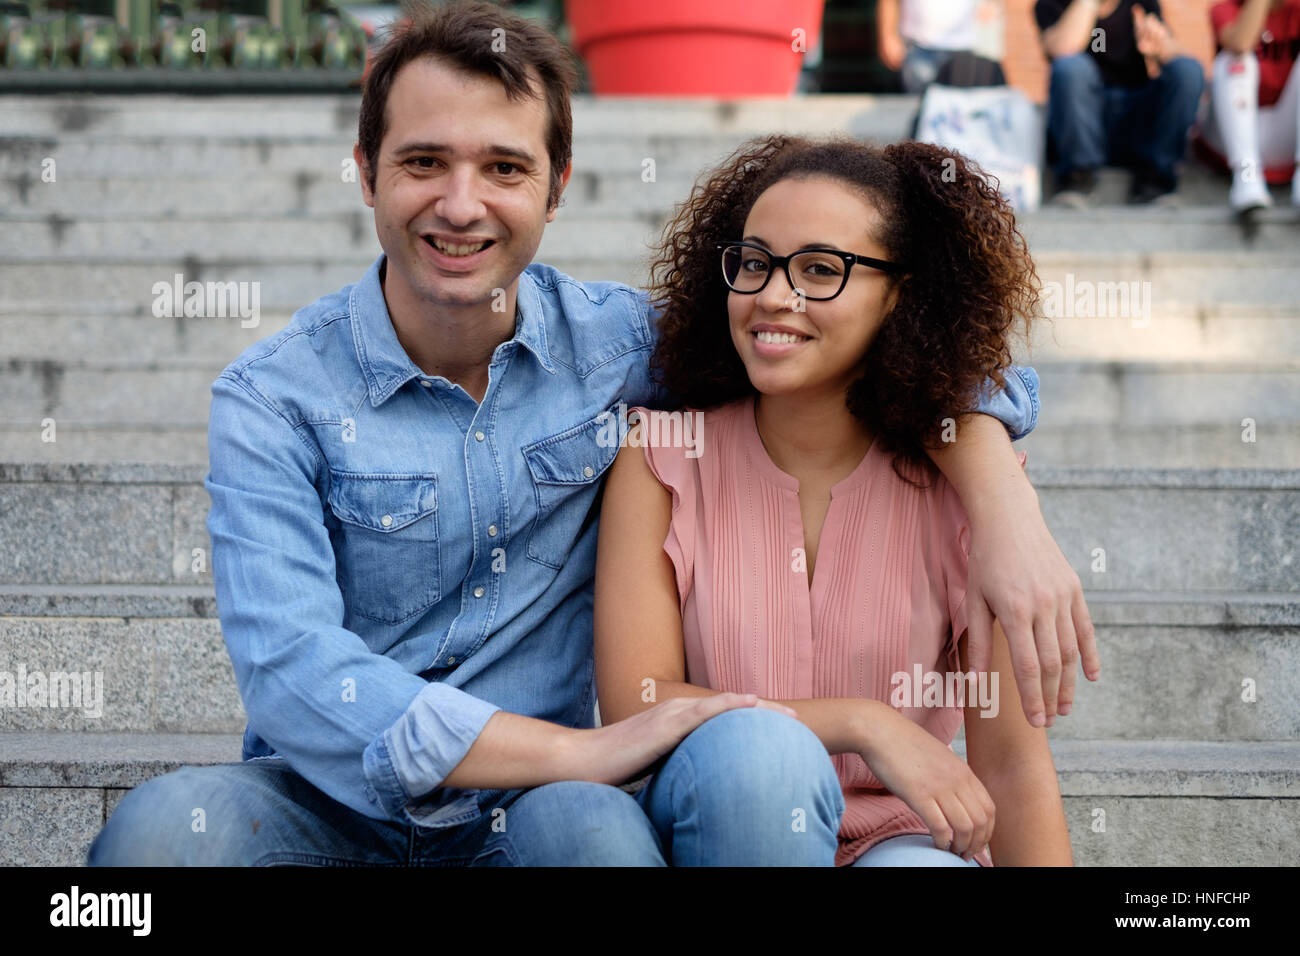 Romantic interracial couple embraced in the city Stock Photo